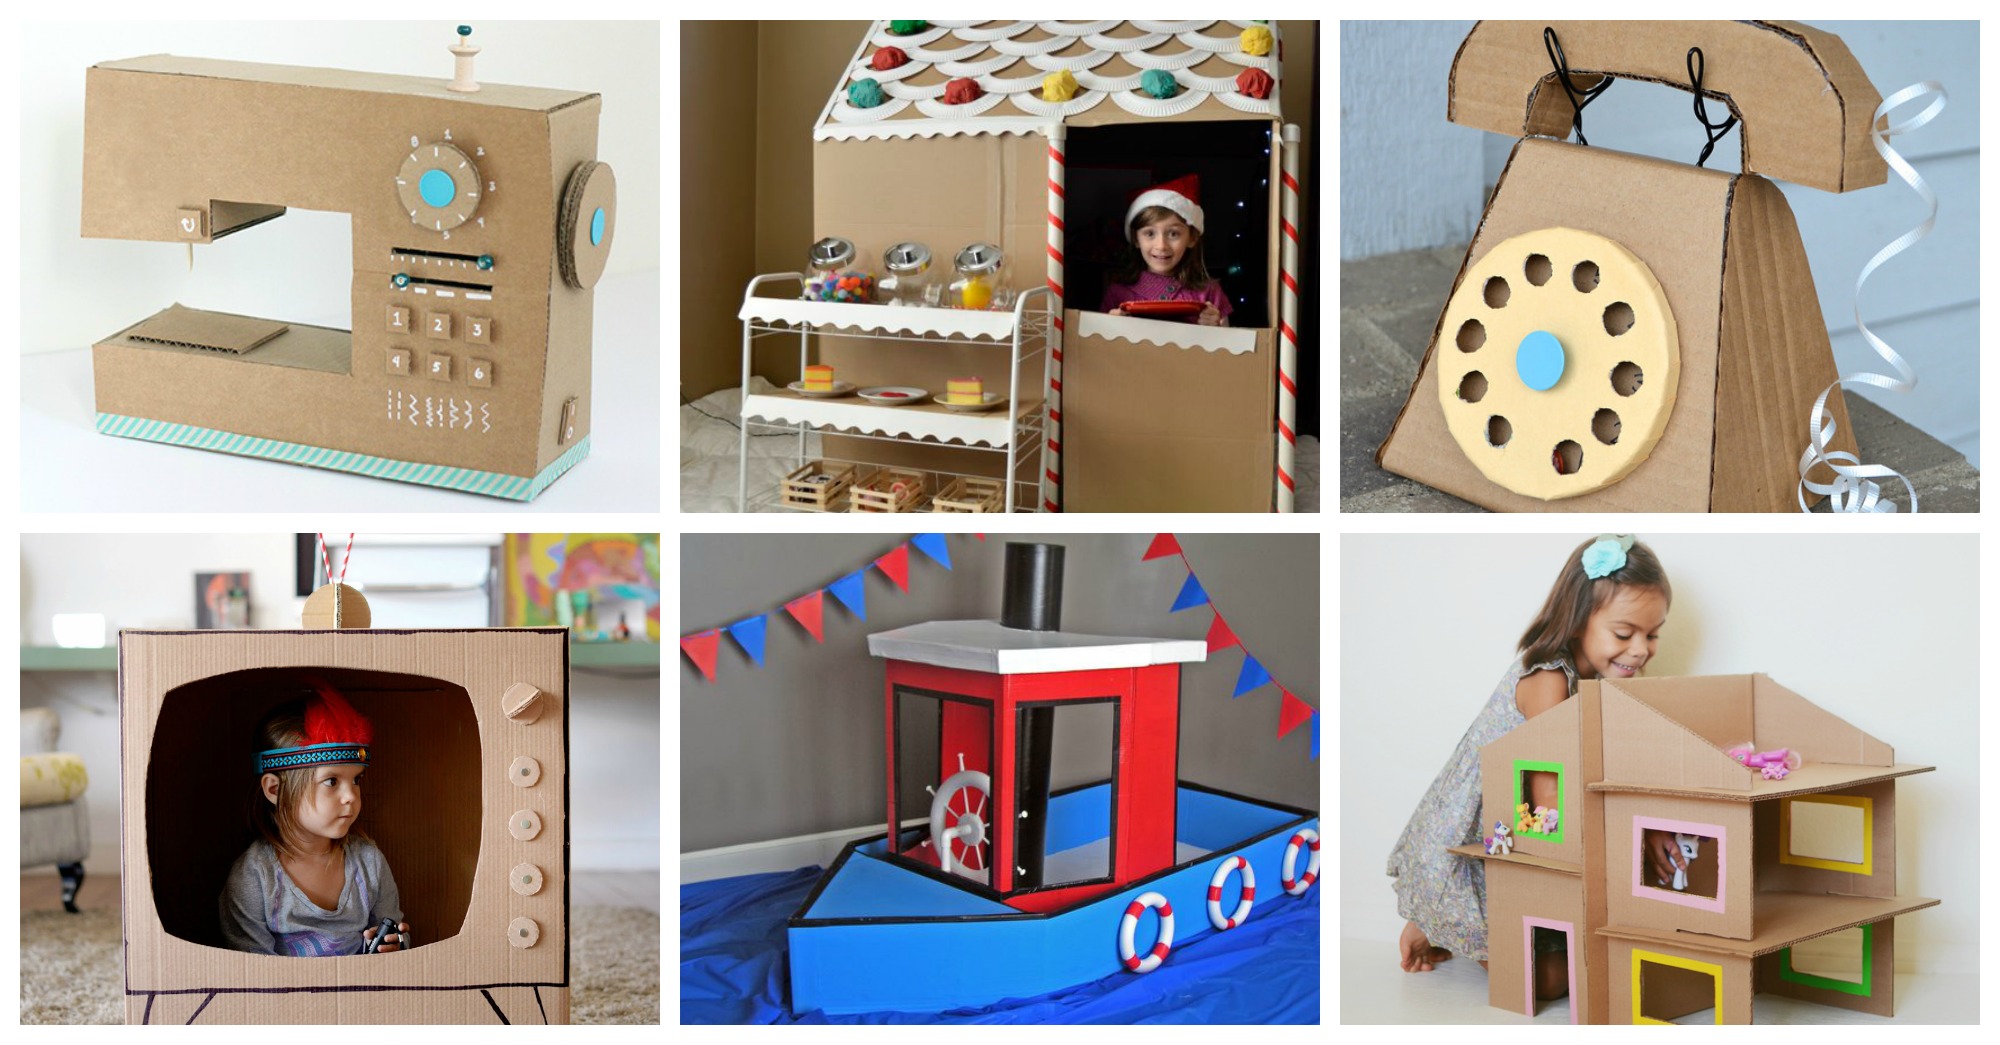 19 Cardboard Box Crafts Your Kids Will Love To Play With
